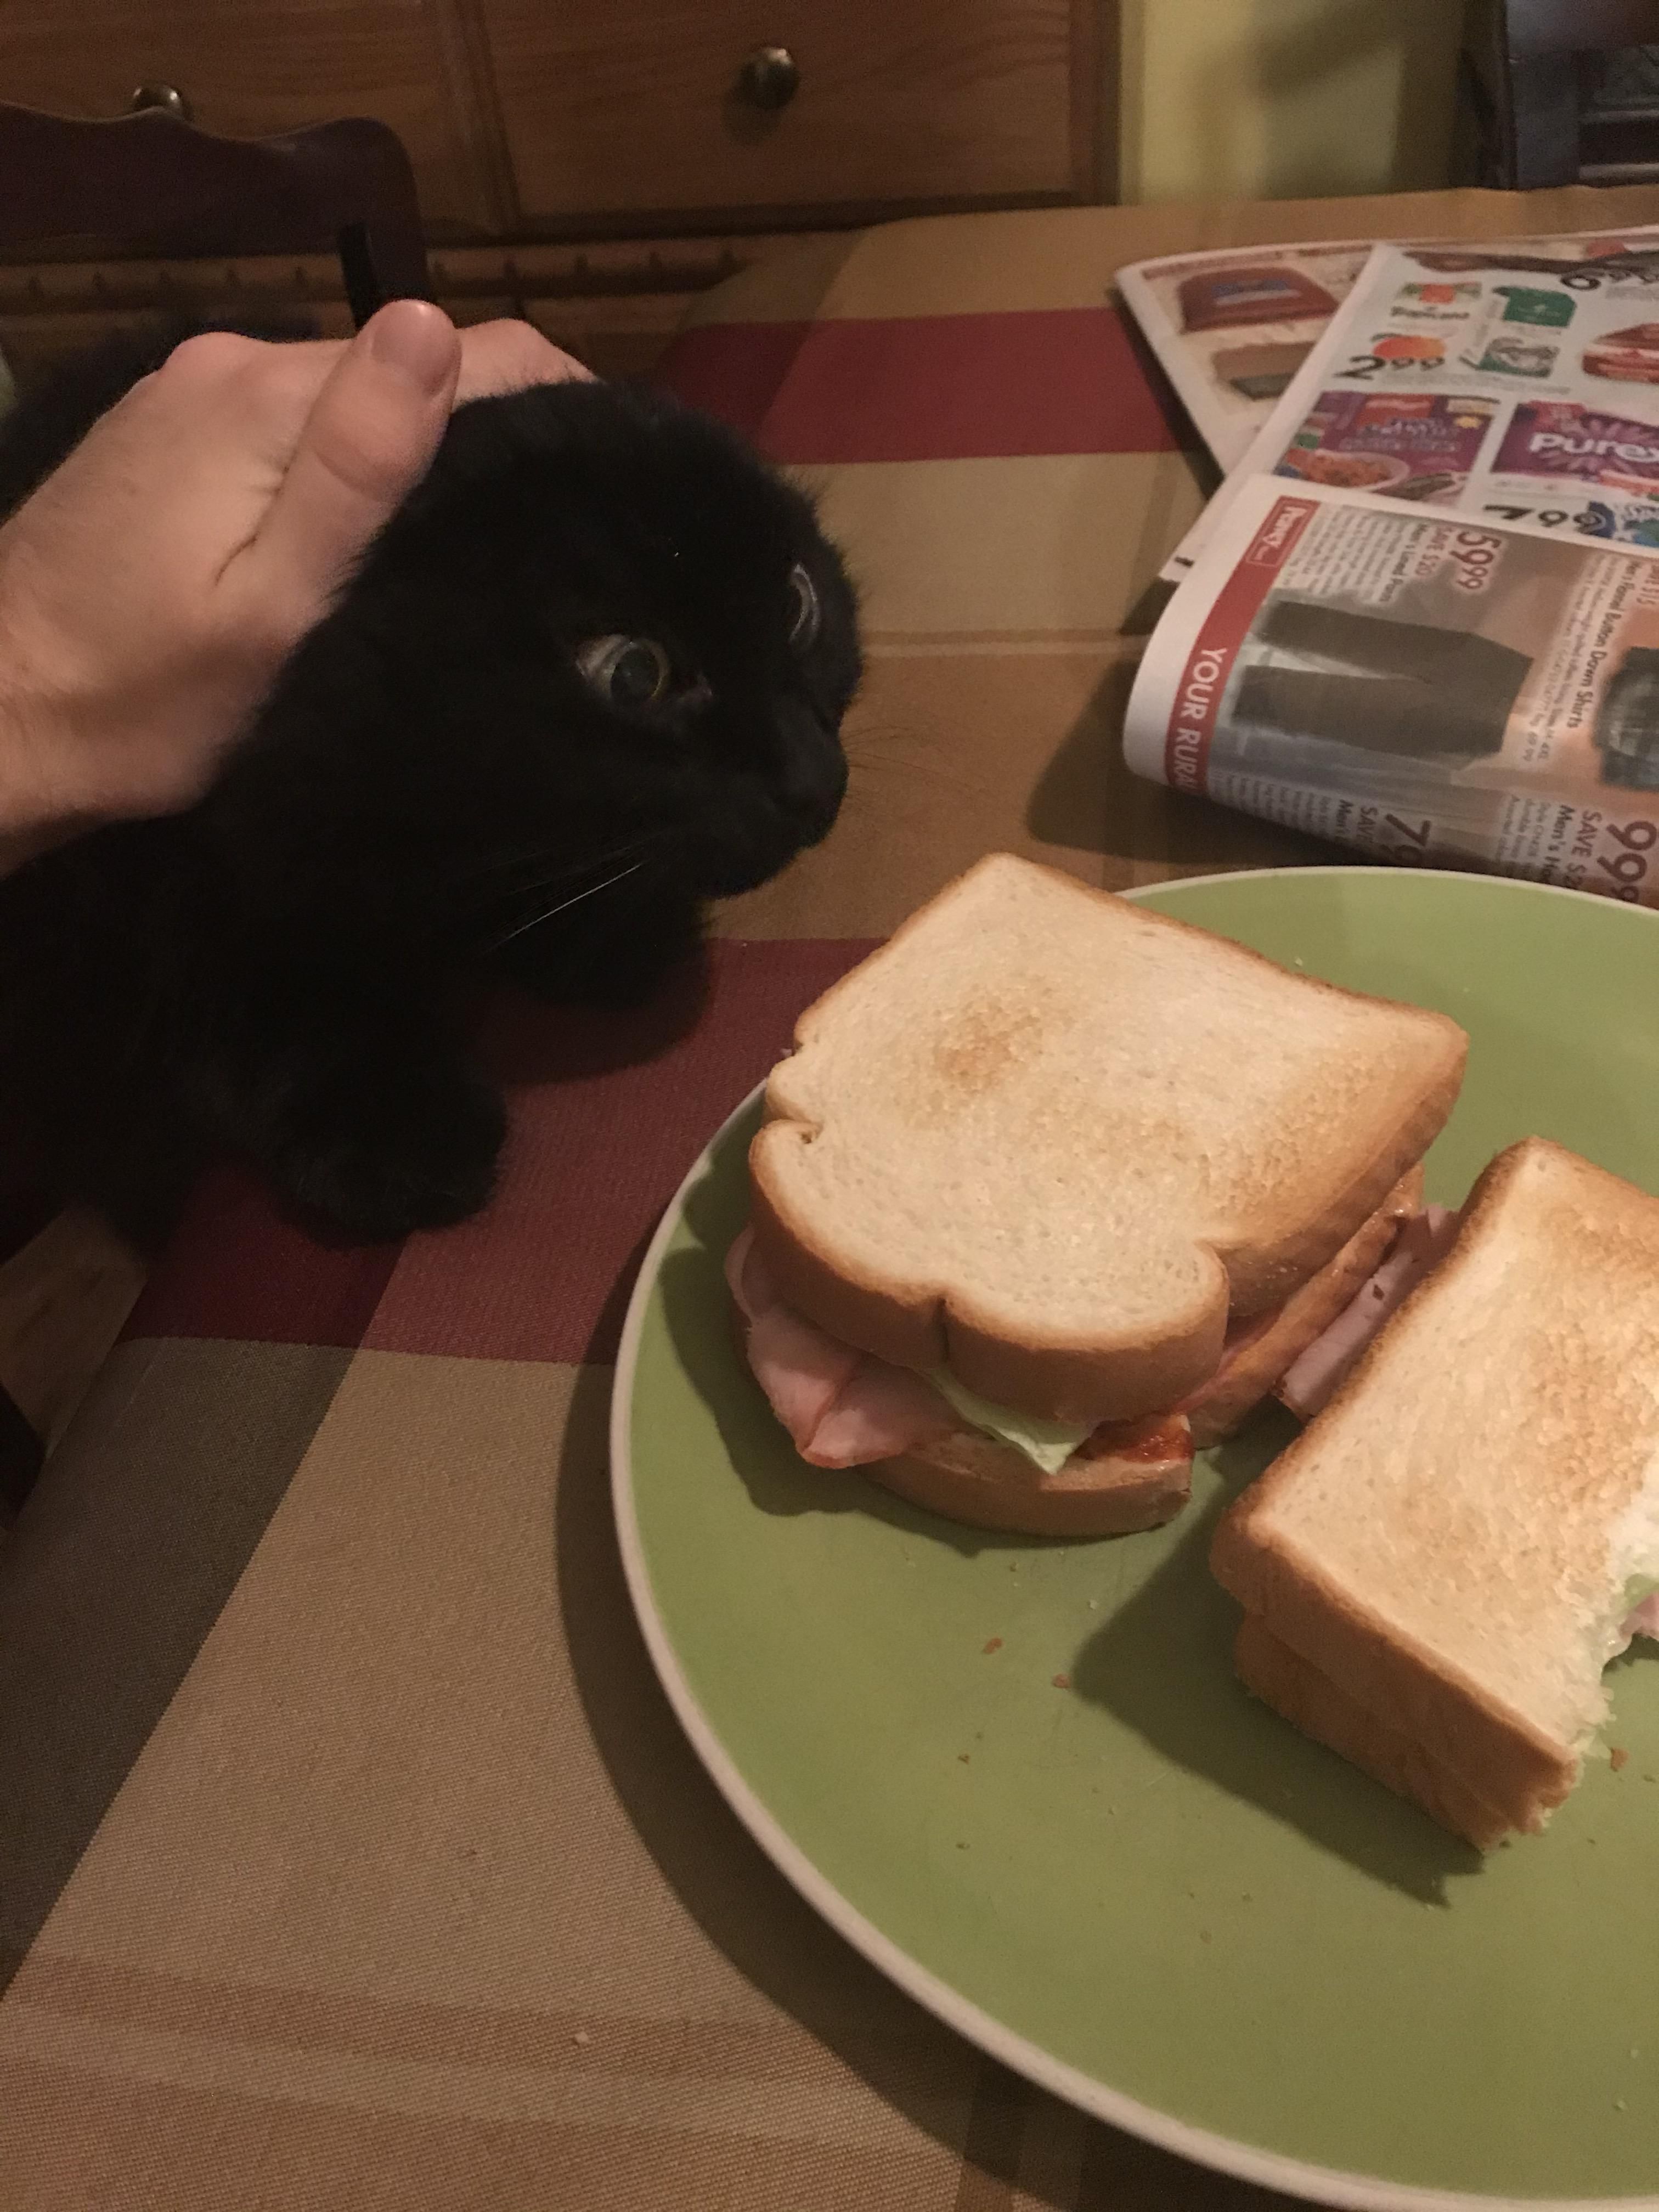 My cat trying desperately to get my sandwich.